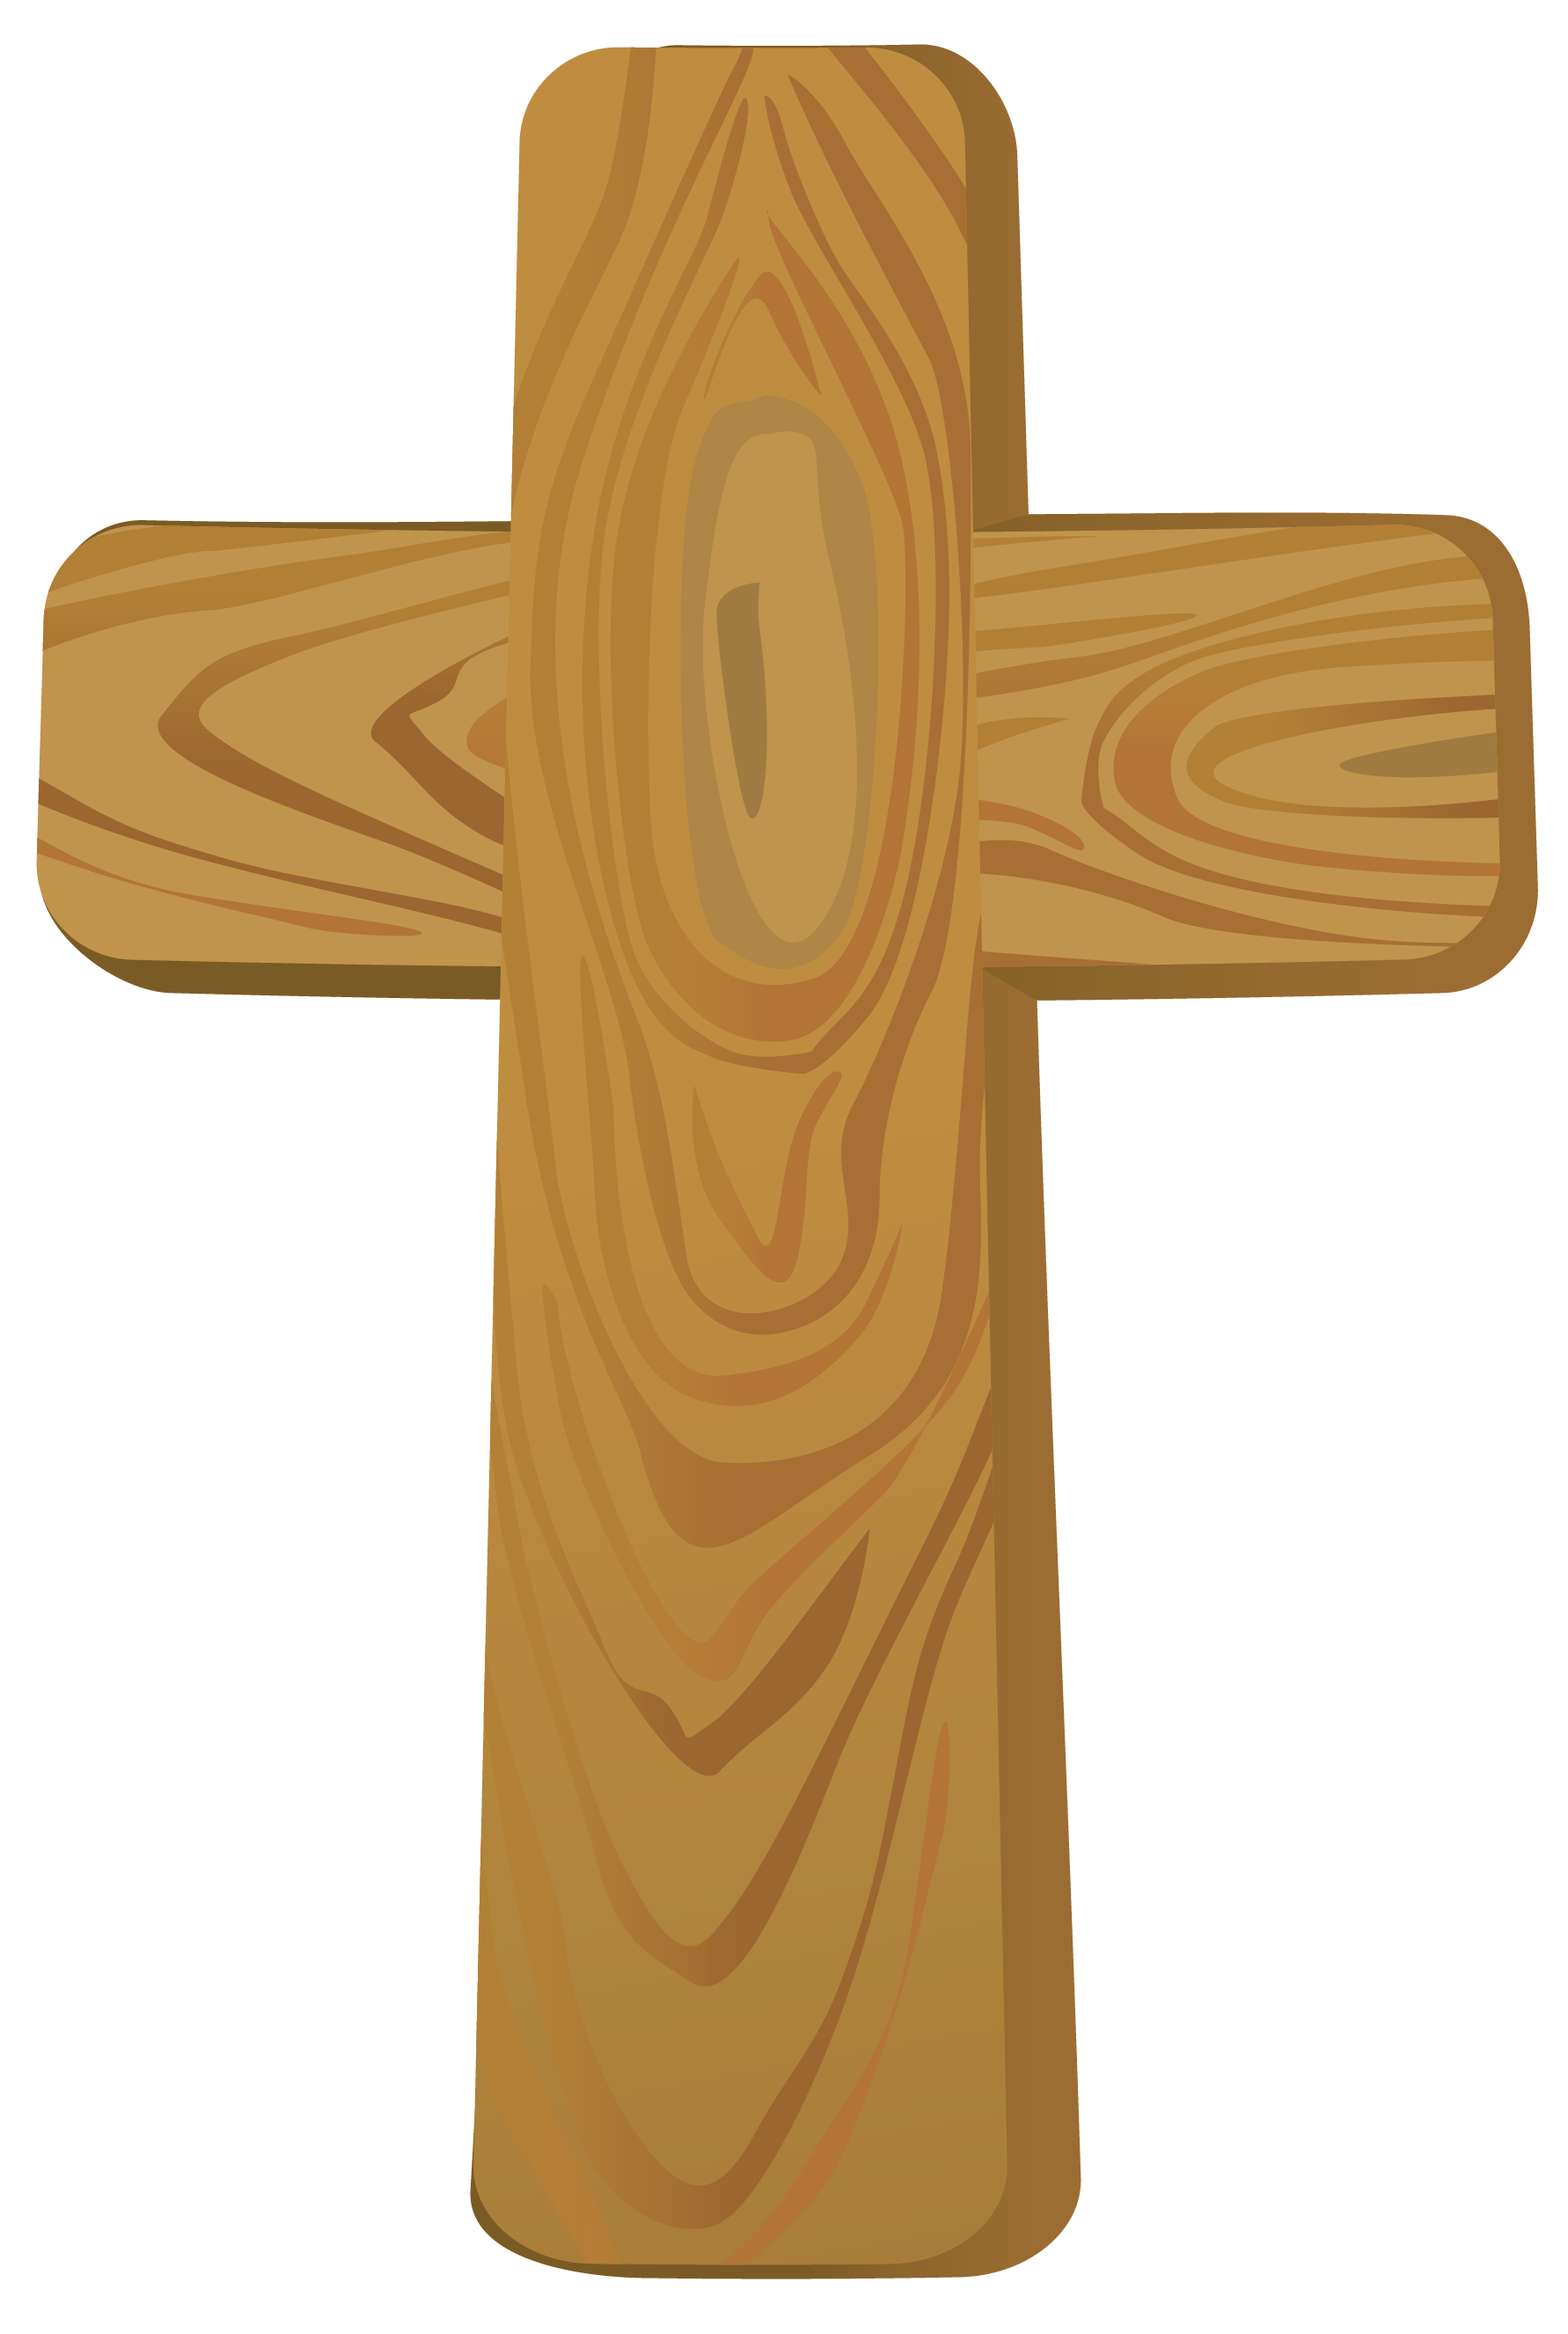 Cross Clip Art Wooden Cross Png Clipart Picture Png Download 1782